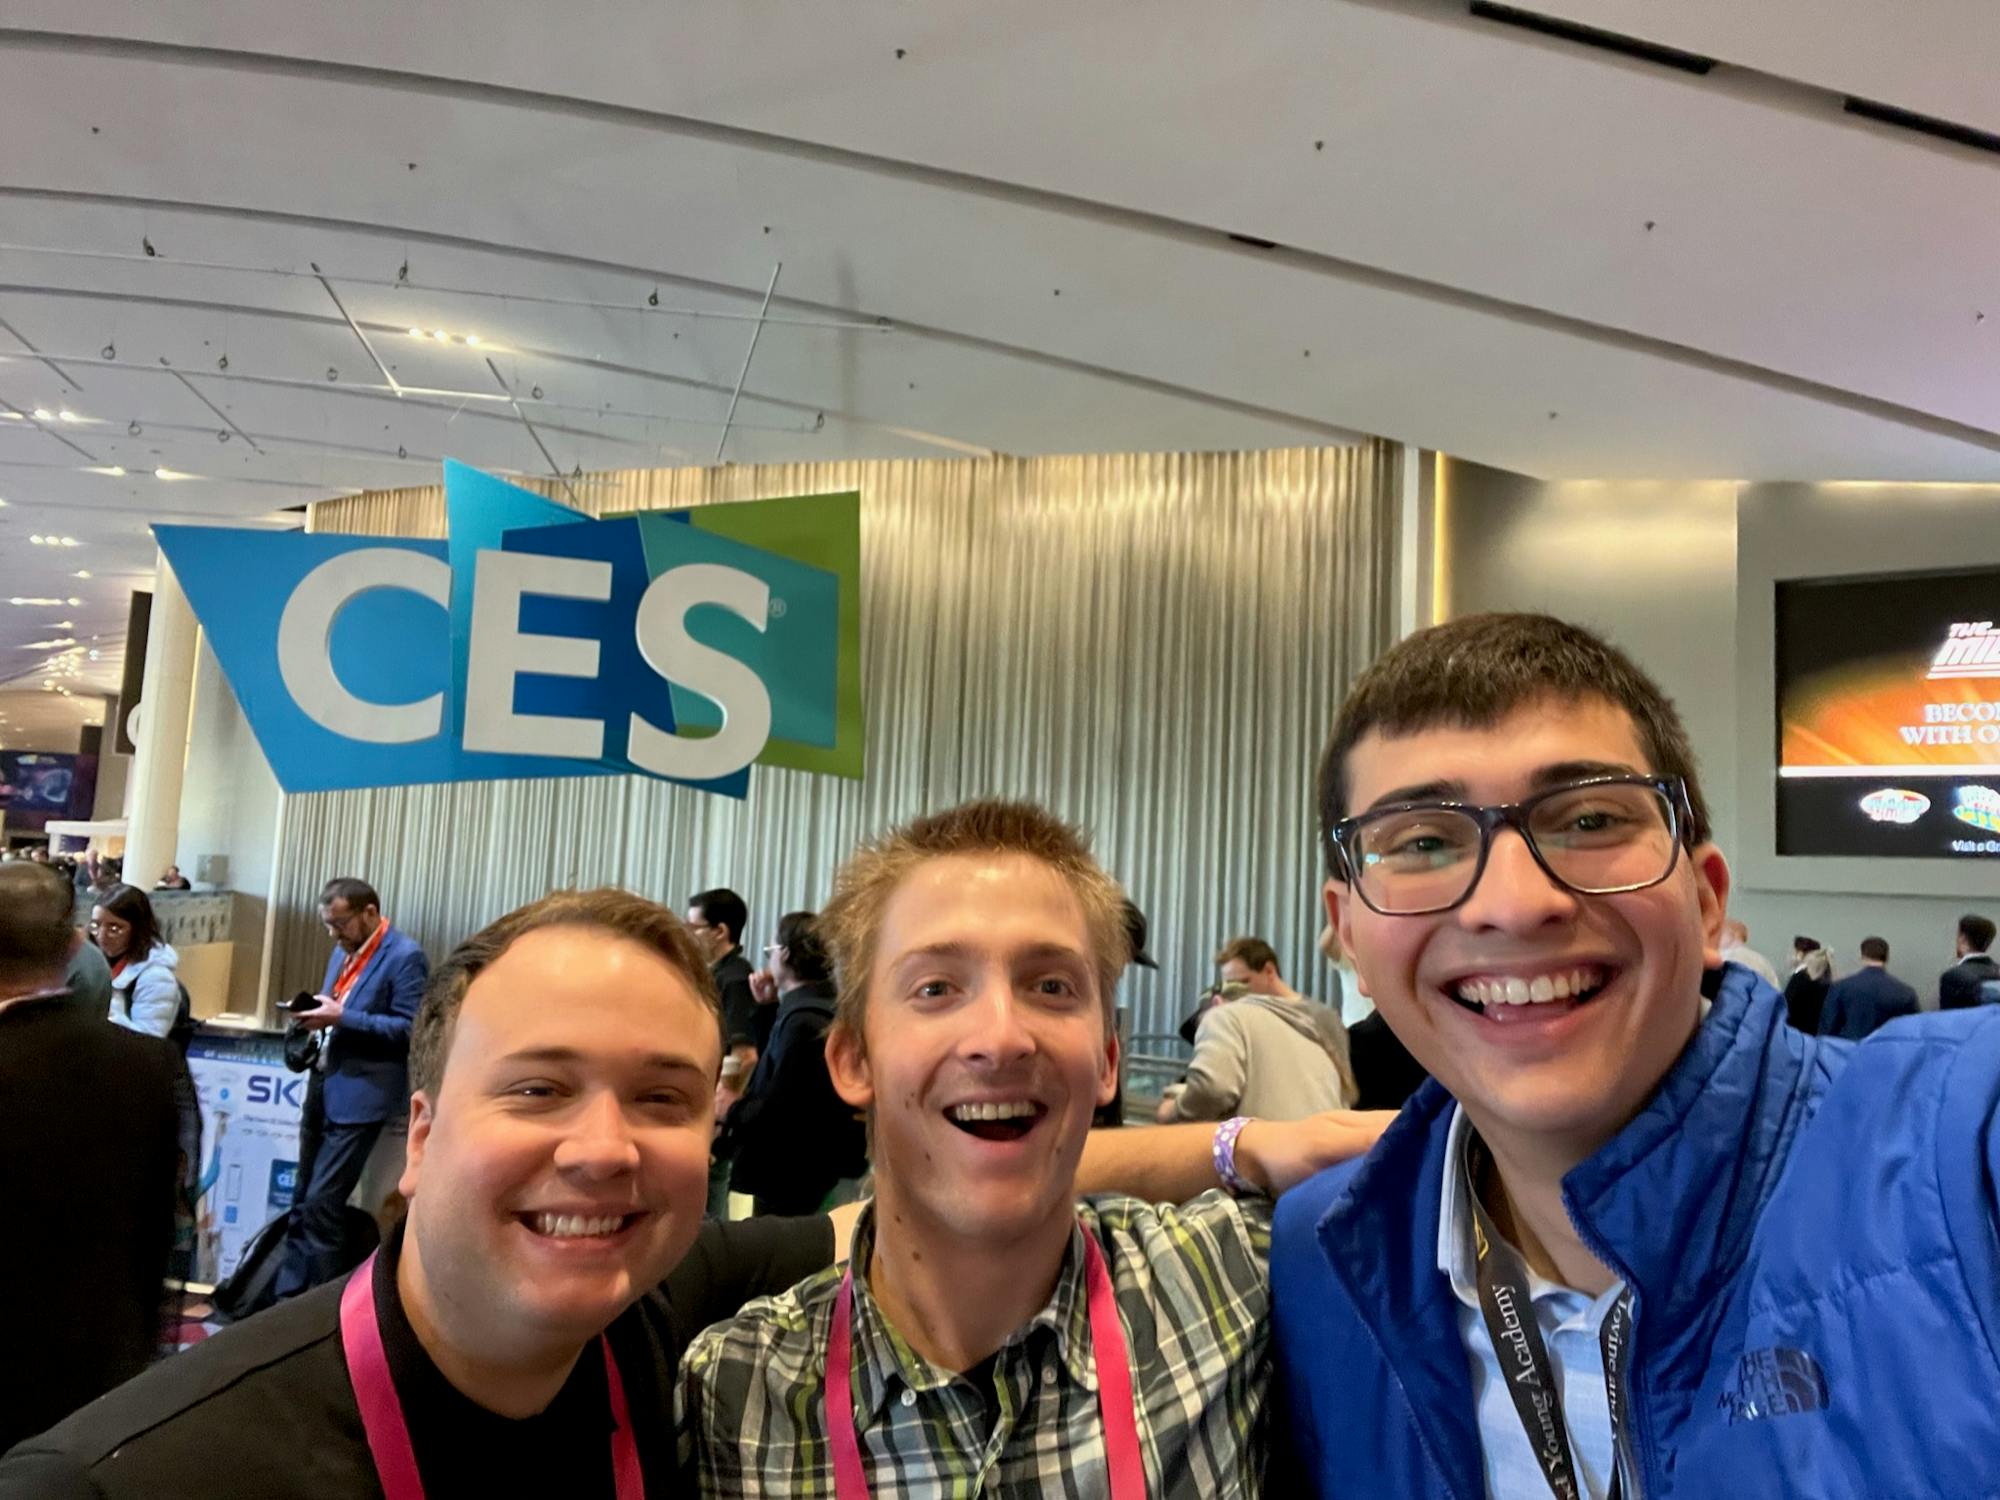 Three people at a tech conference posing in front of a logo 